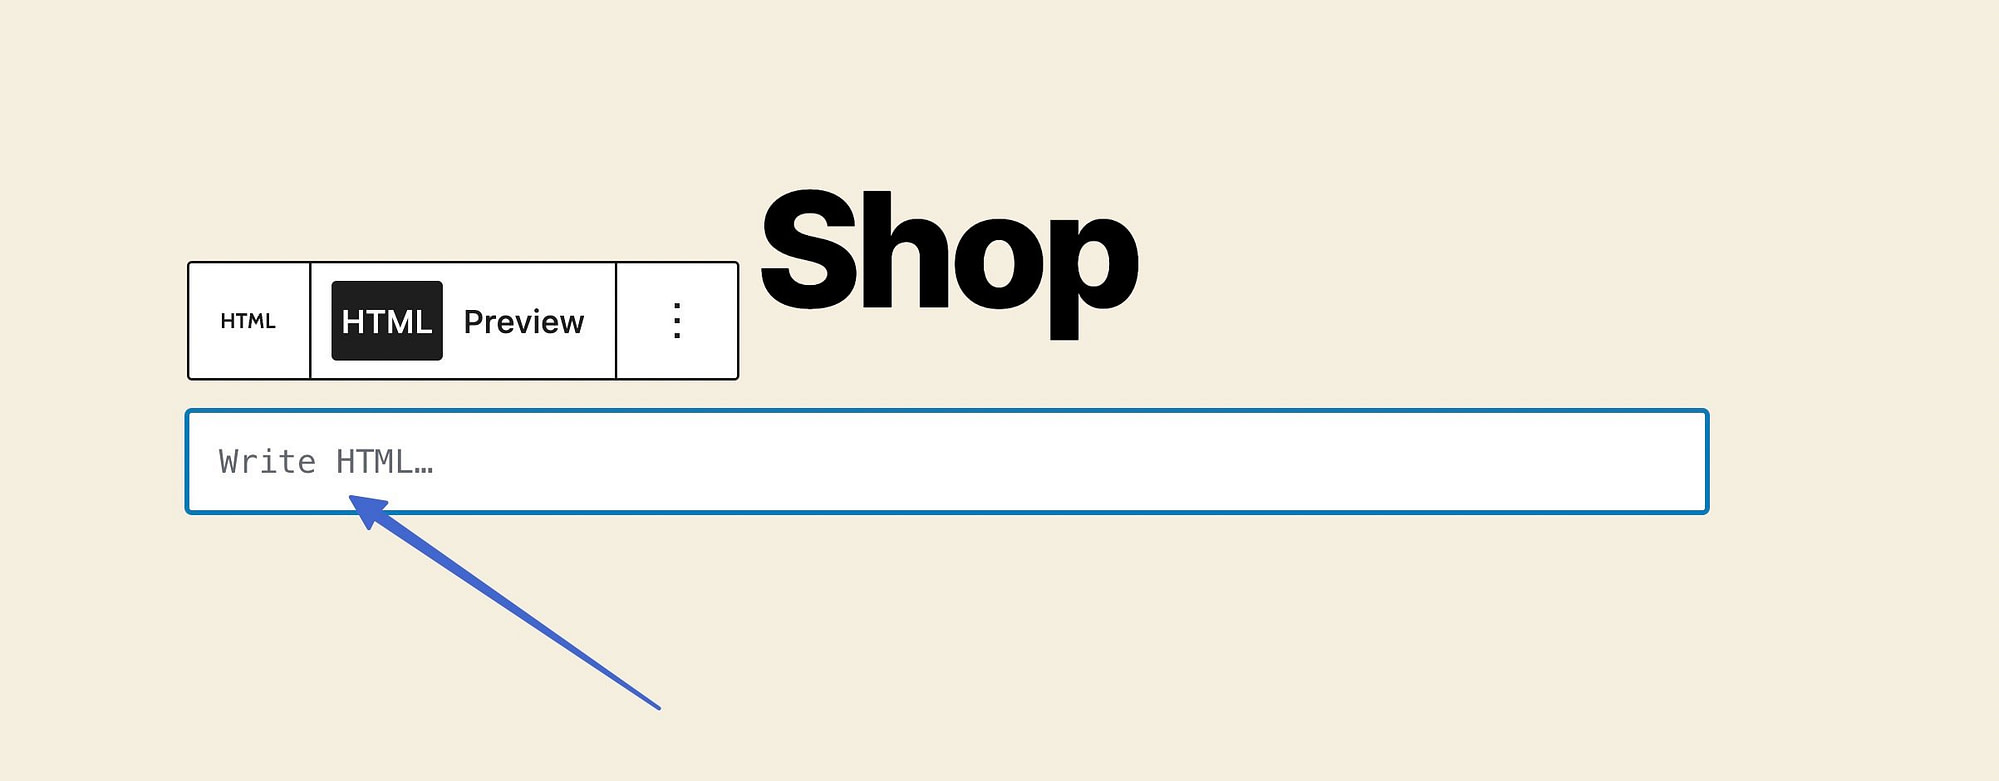 pasting in the HTML to make the Shopify WordPress integration 